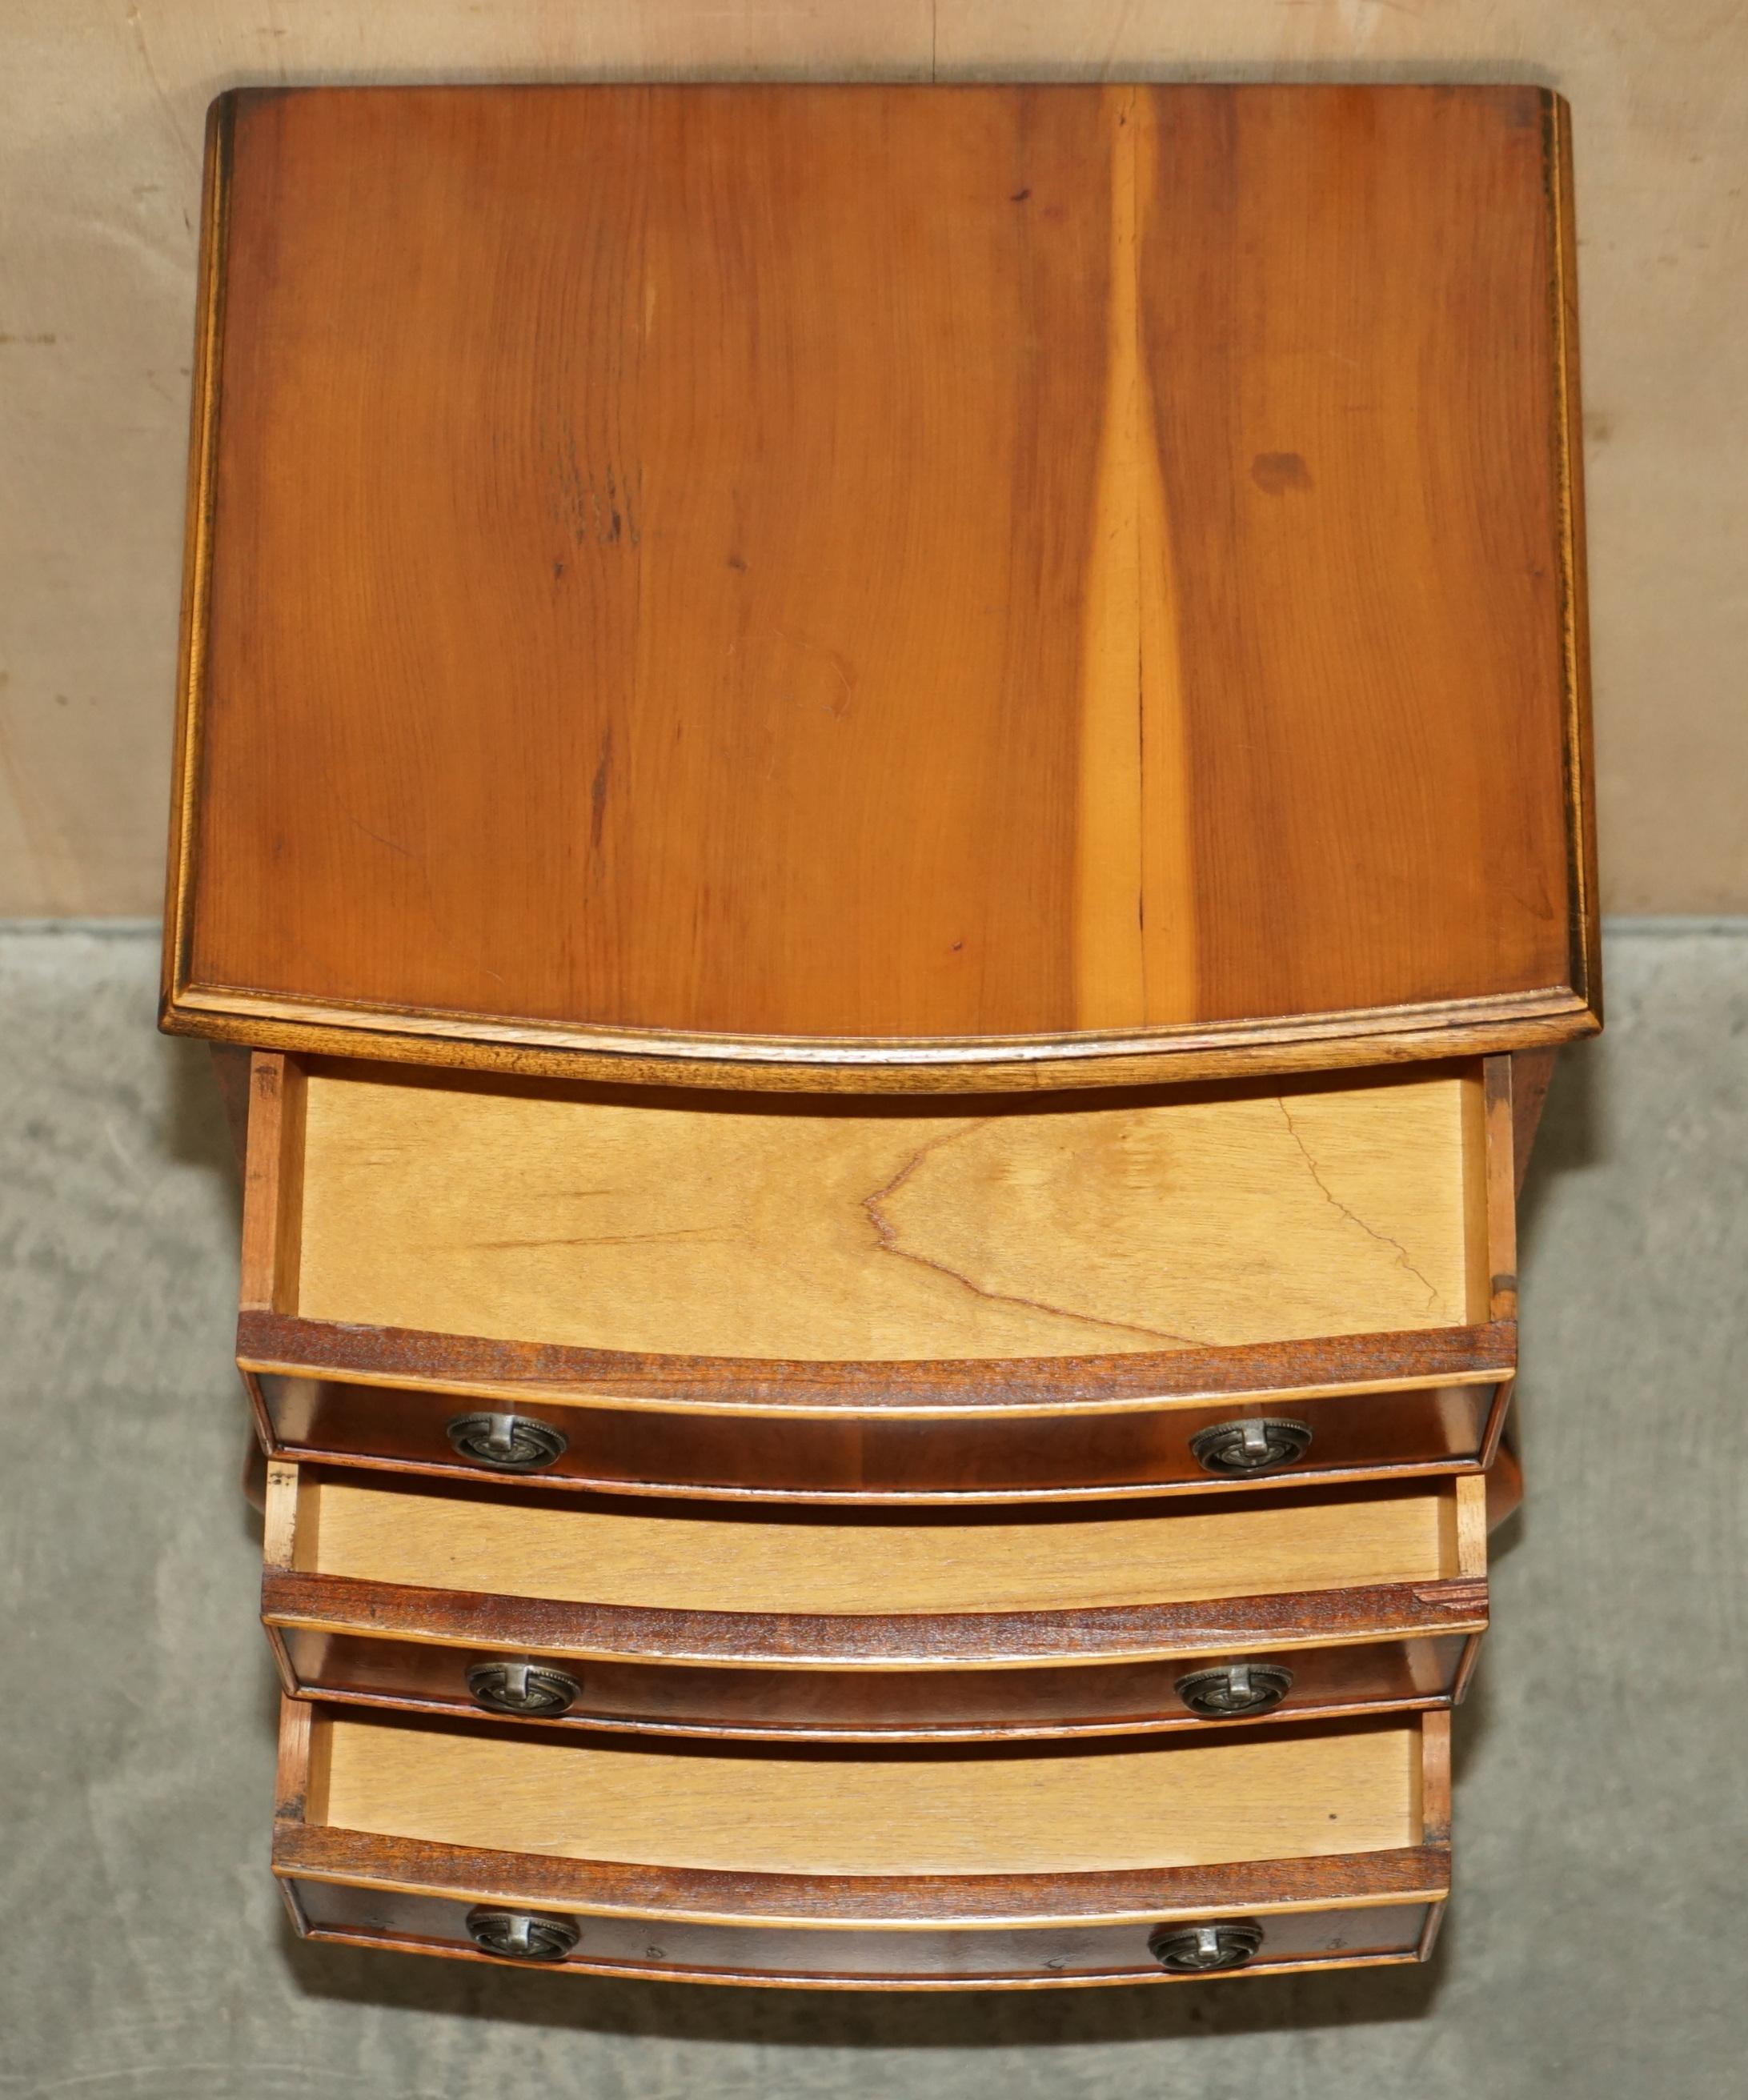 CIRCA 1940's BURR YEW WOOD BOW FRONTED BEDSIDE SIDE TABLE CHEST OF DRAWERS For Sale 11